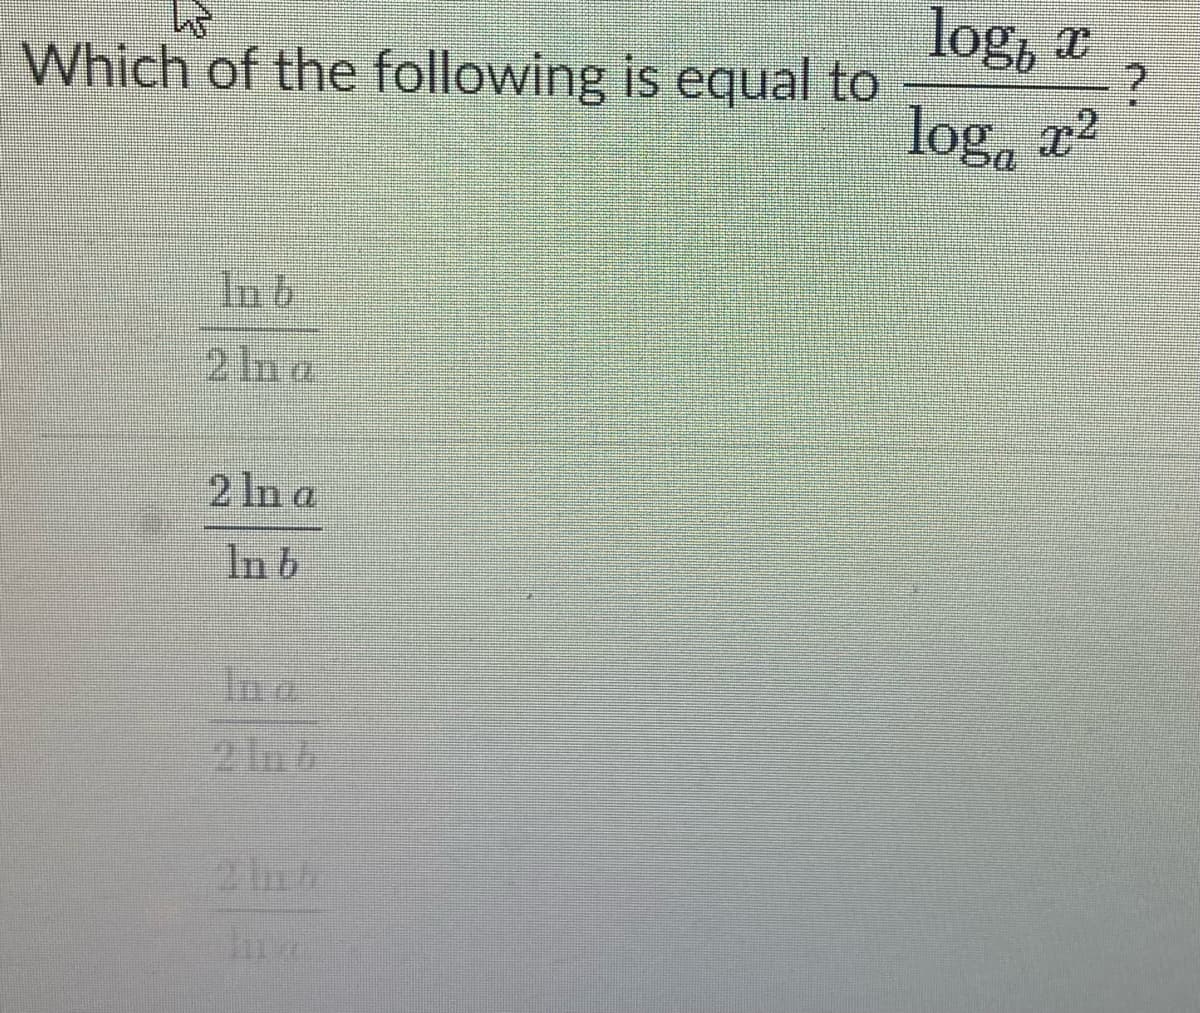 log, a
log, r
Which of the following is equal to
2 In a
In b
